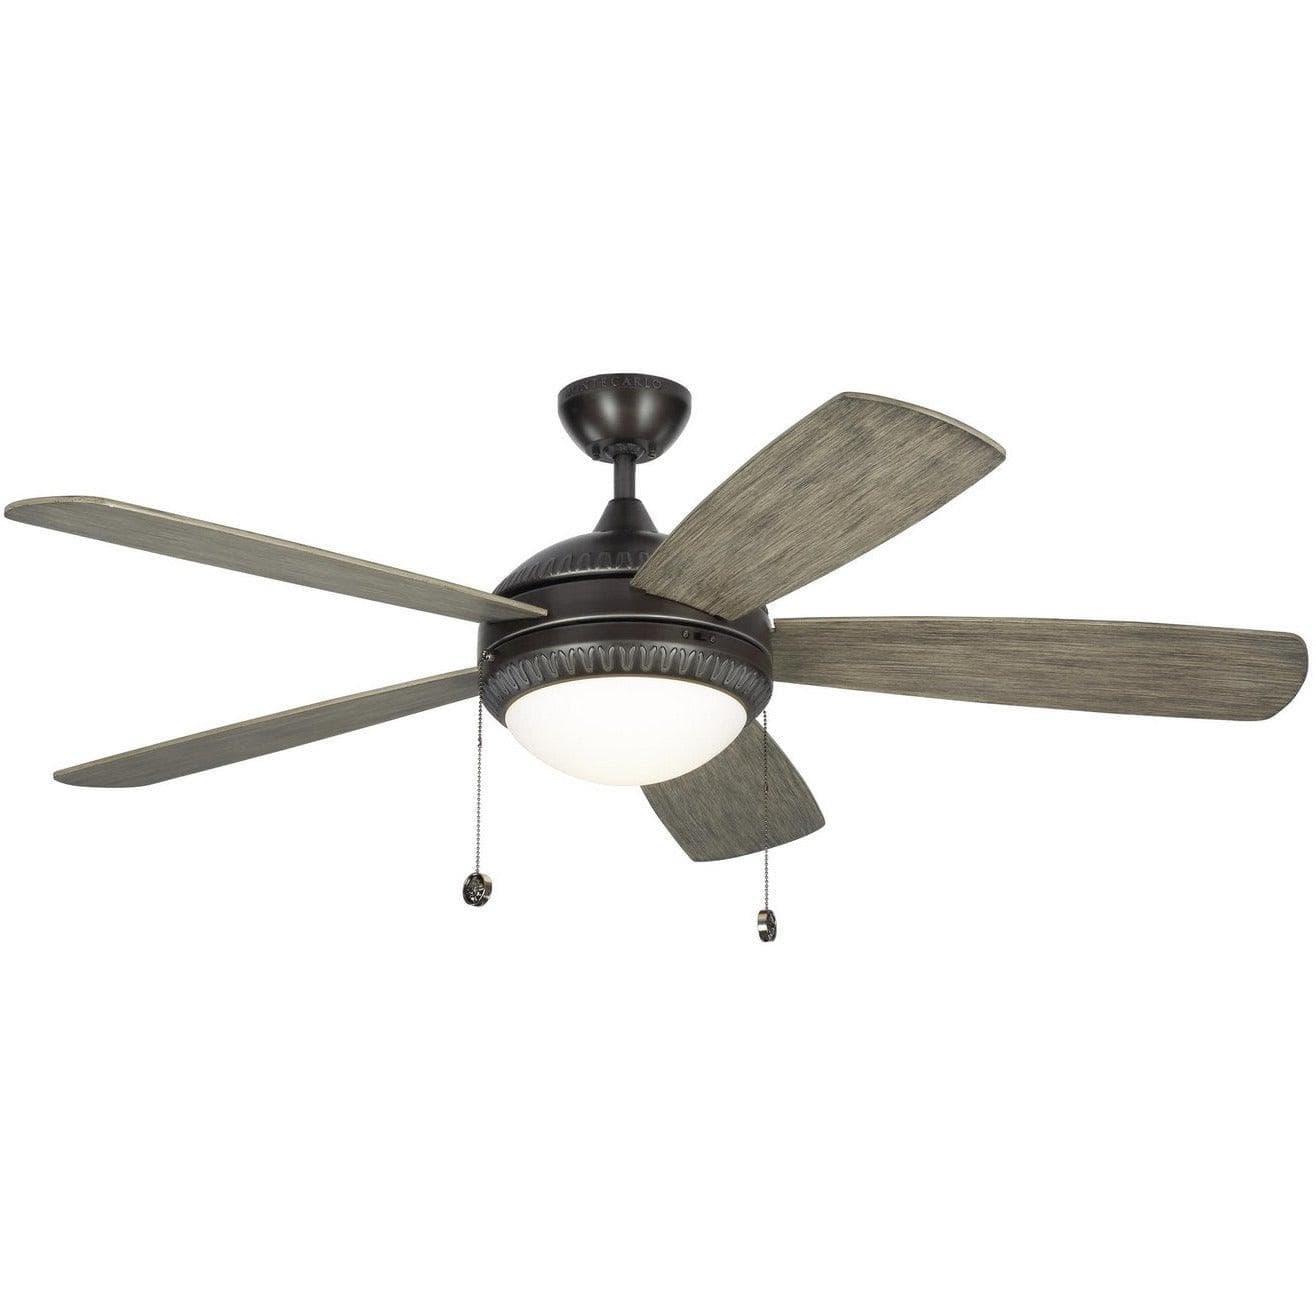 Visual Comfort Fan Collection - Discus Ornate 52" Ceiling Fan - 5DIO52AGPD | Montreal Lighting & Hardware